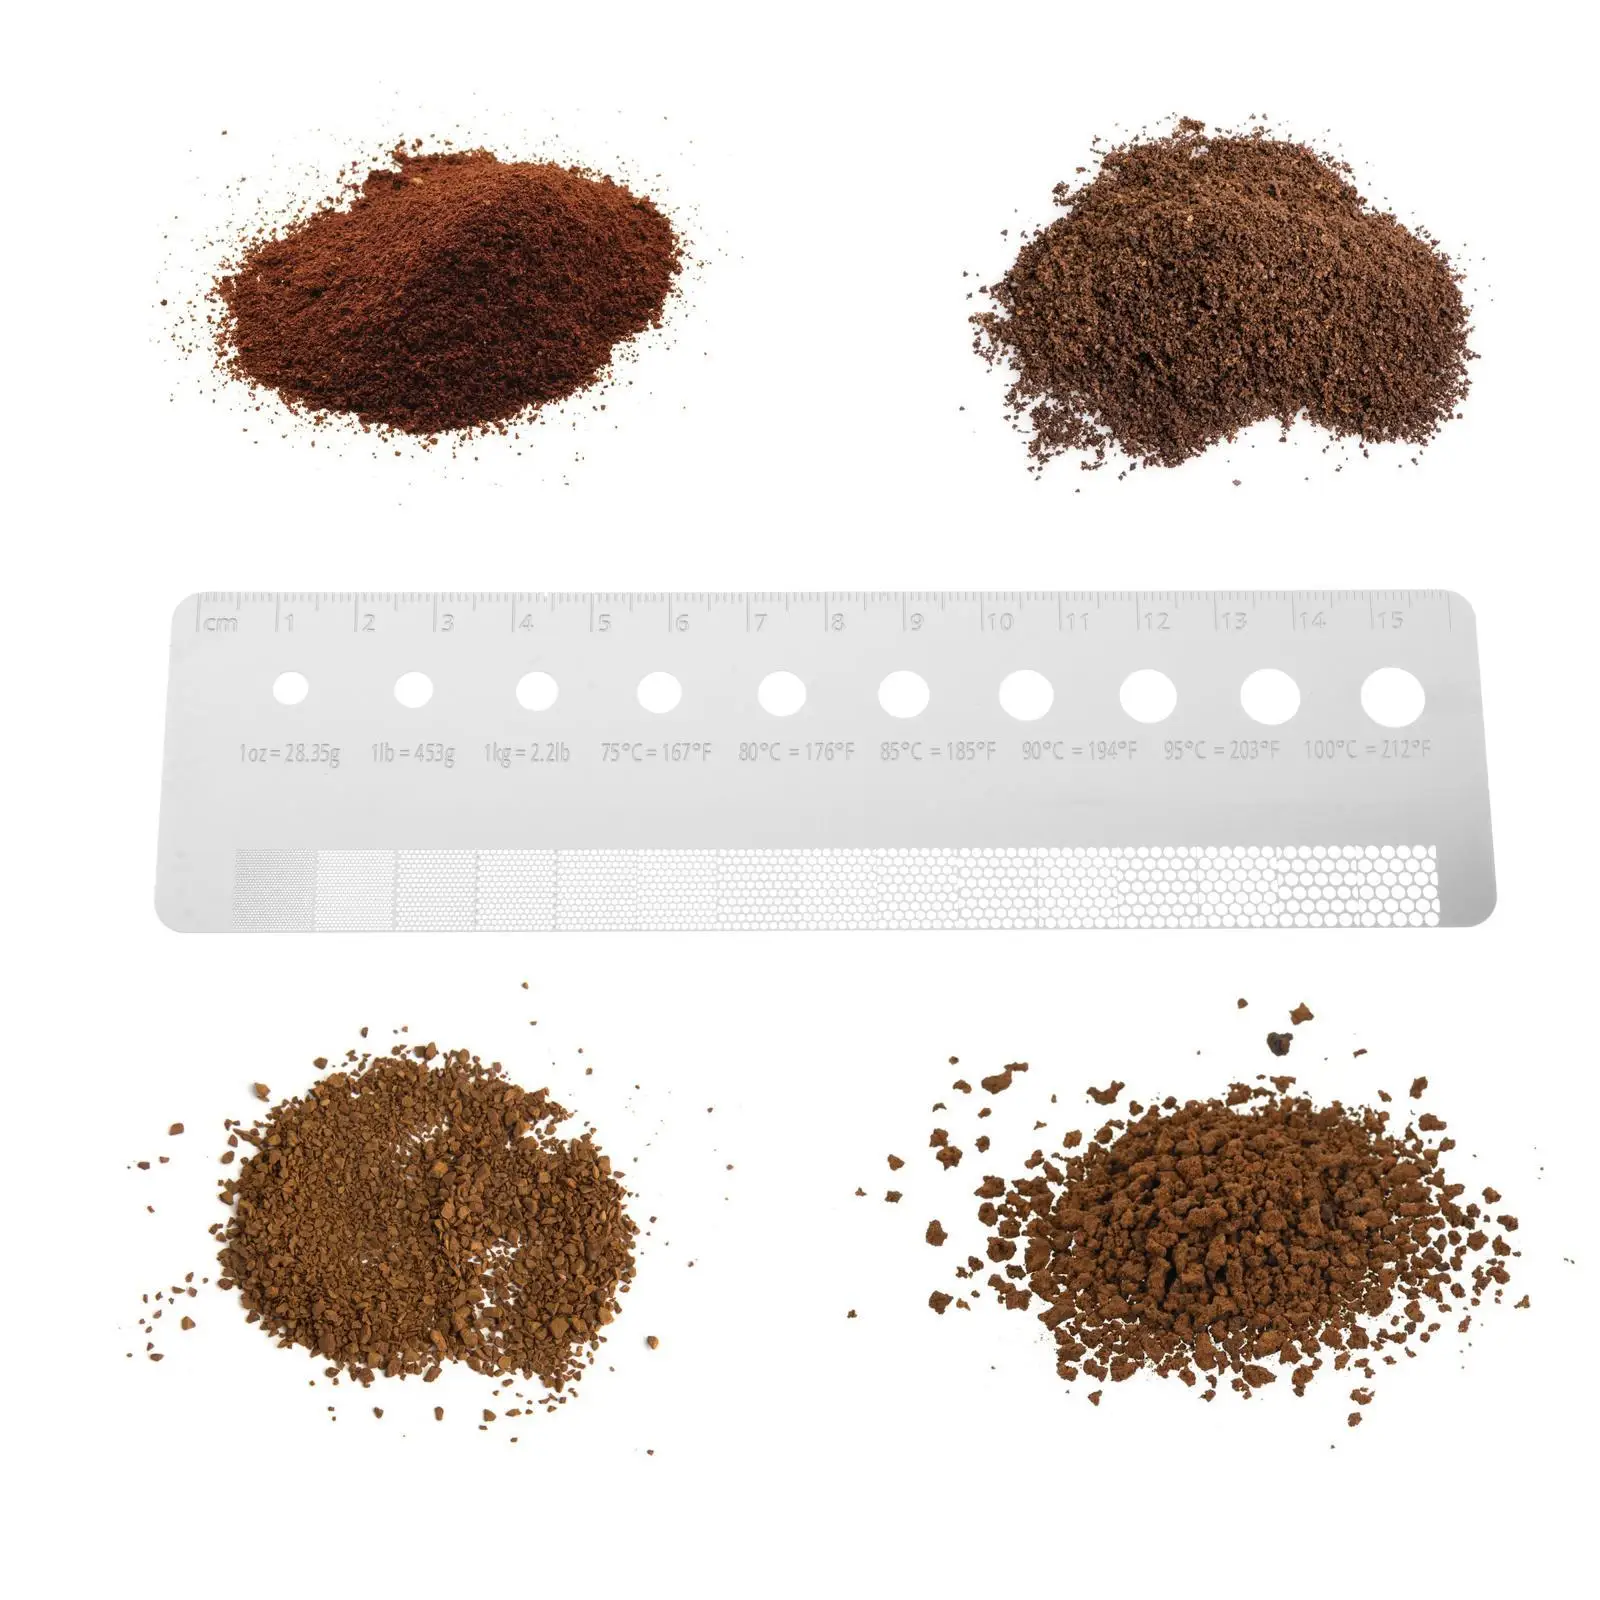 Ground coffee Sizes Measuring High Precision Measuring Tool Roughness Gauge Card Coffee Powder Size Scale for Coffee Maker Cafes